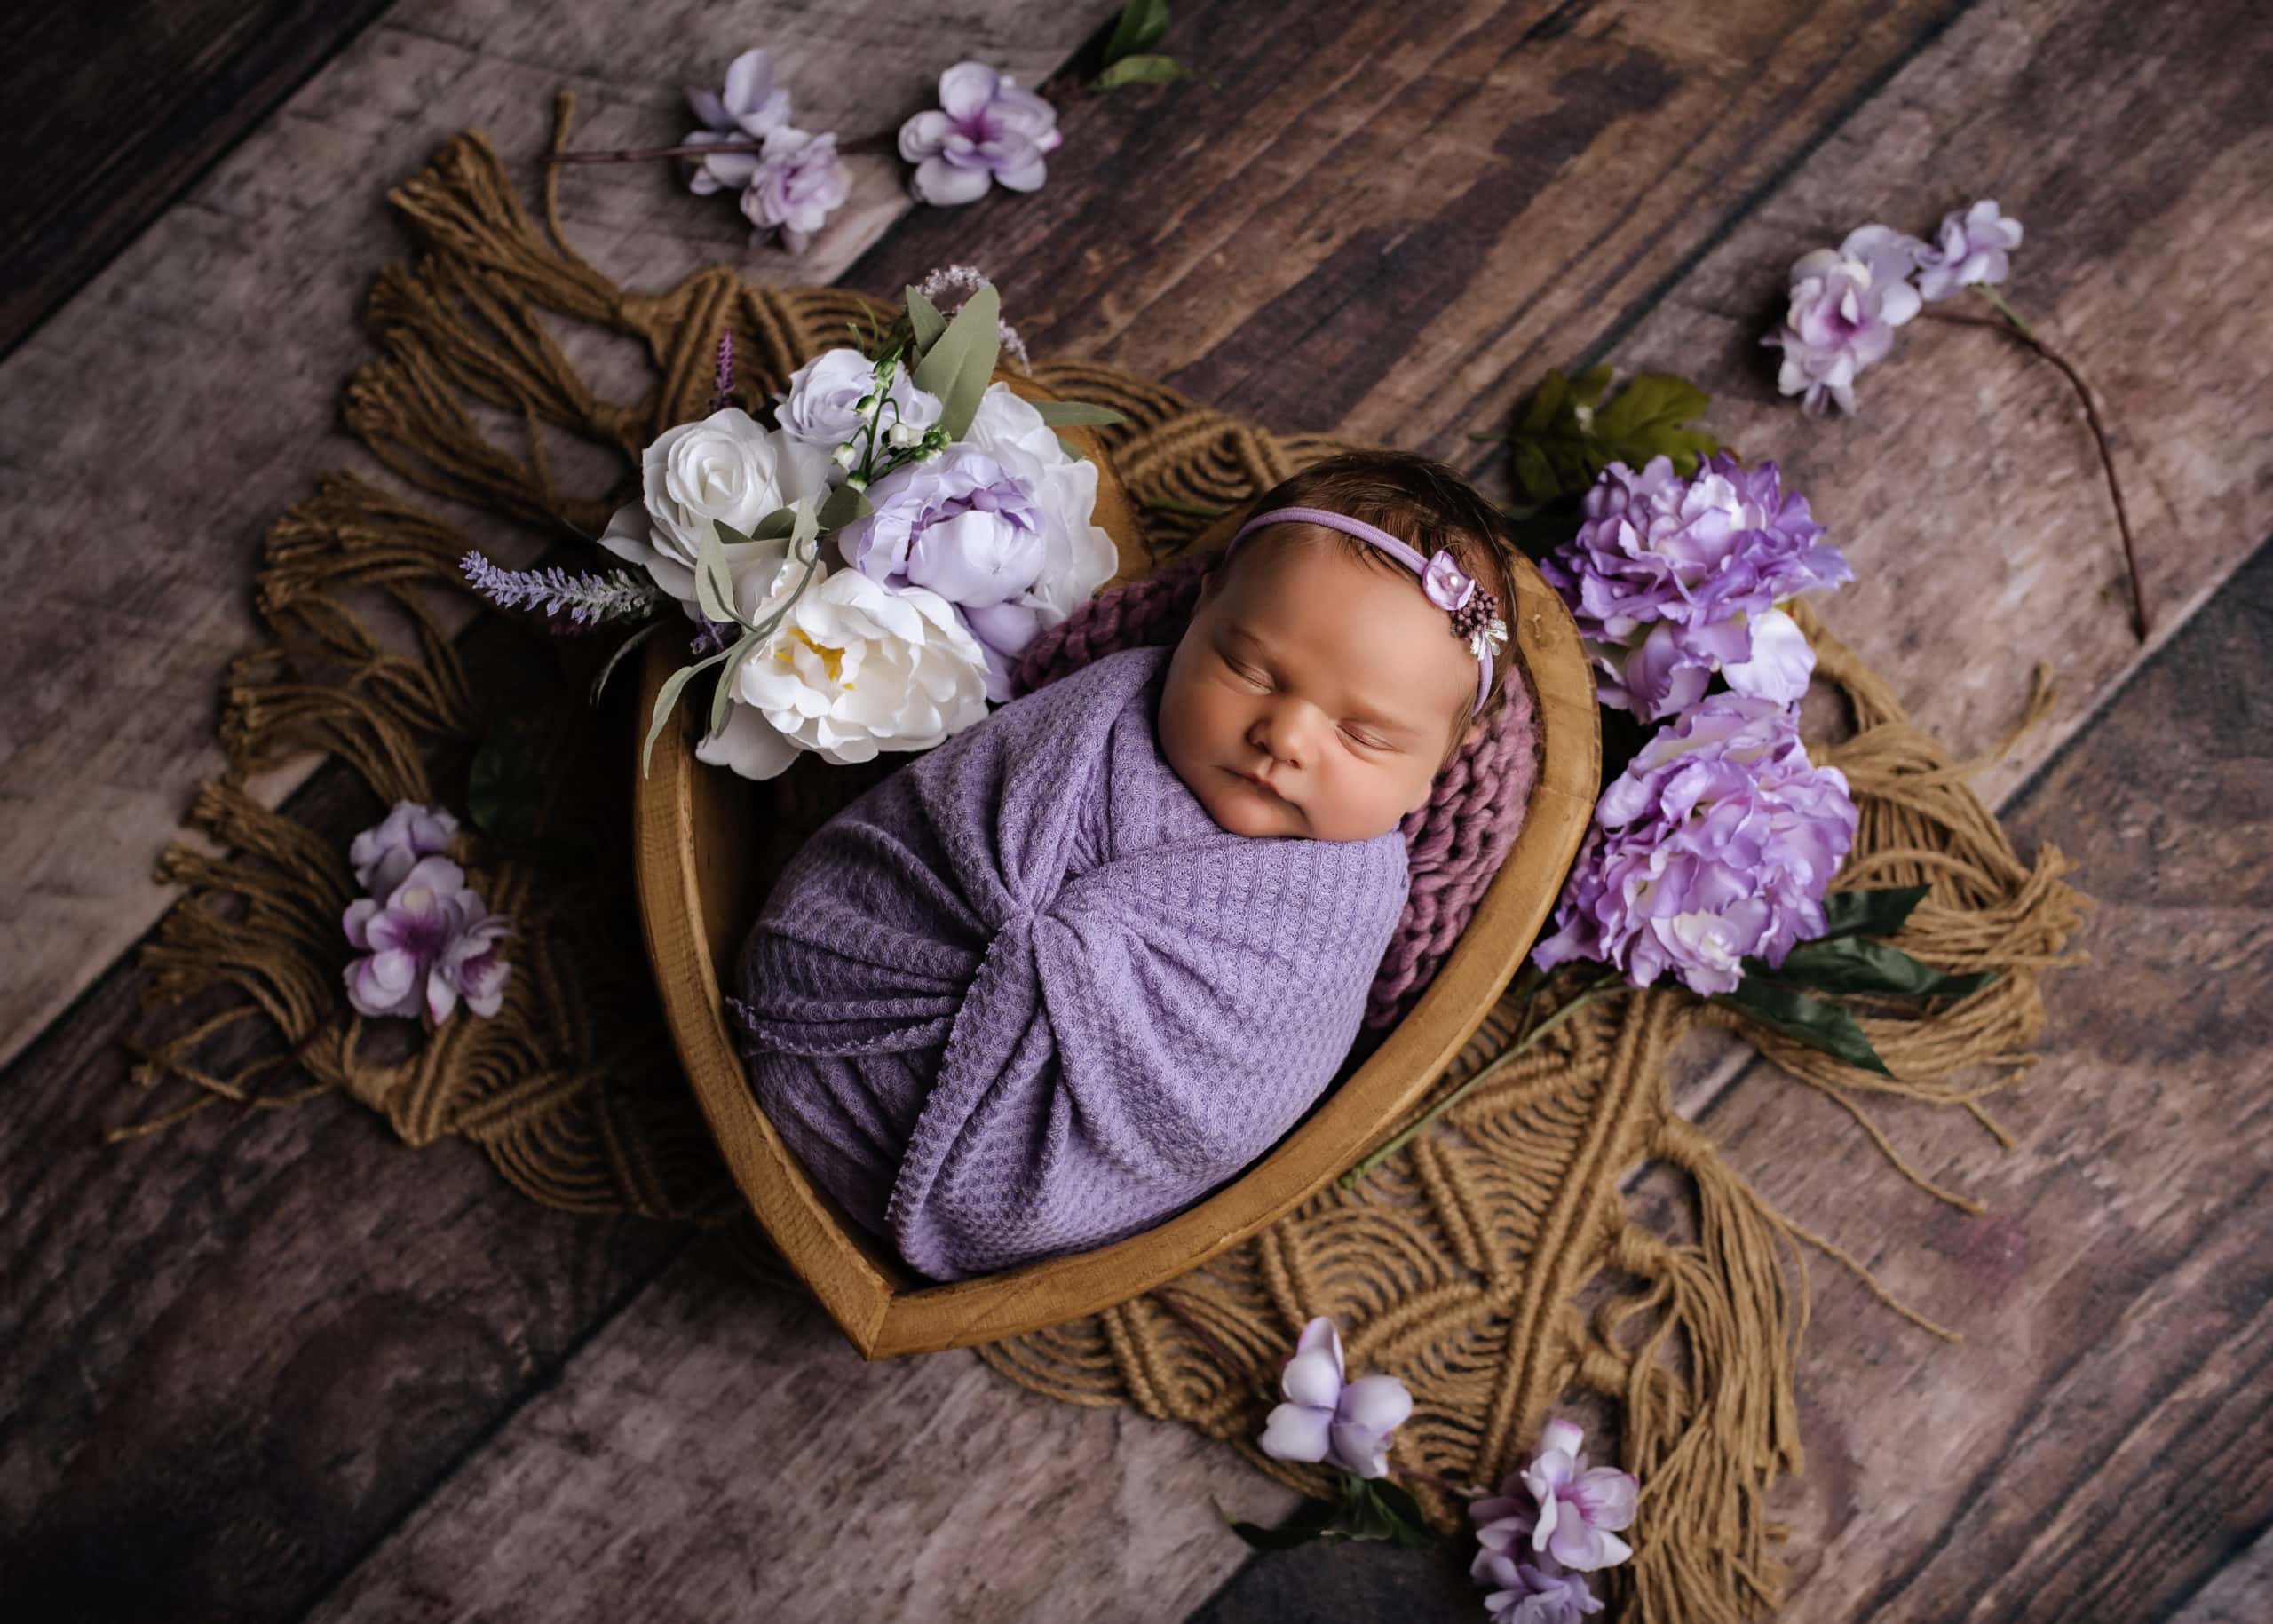 Newborn Baby in a Heart Bowl wrapped in Purple with purple Flowers, Prince George, Newborn Photography Studio